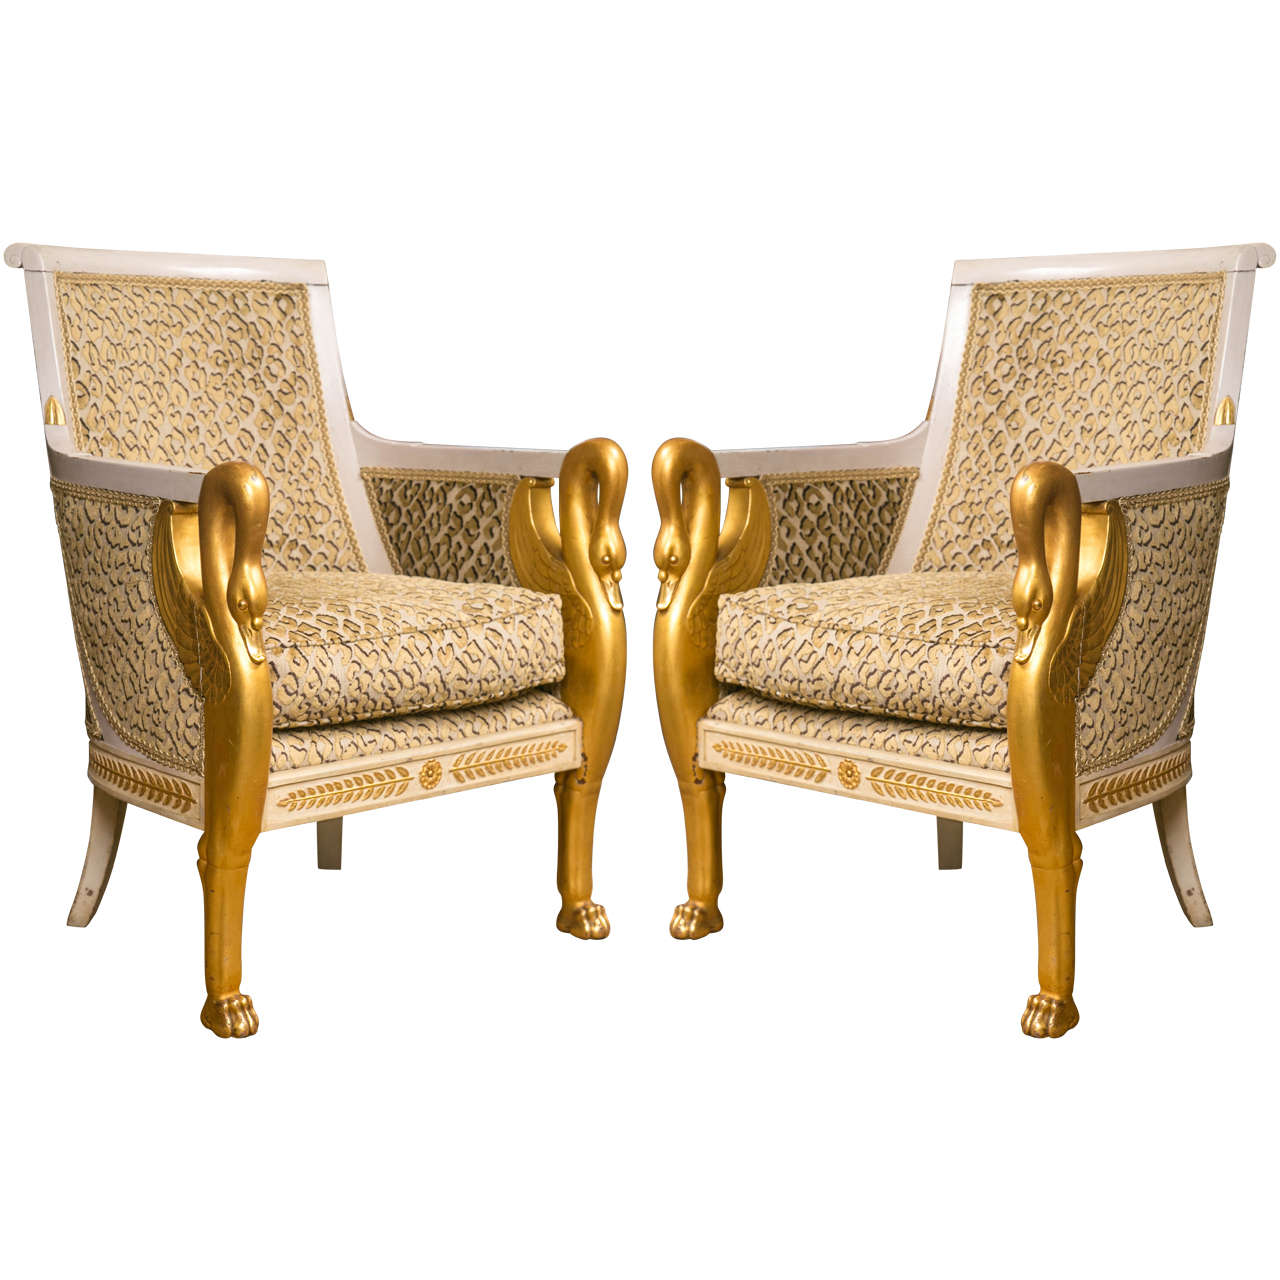 Pair of Period French Empire Bergeres